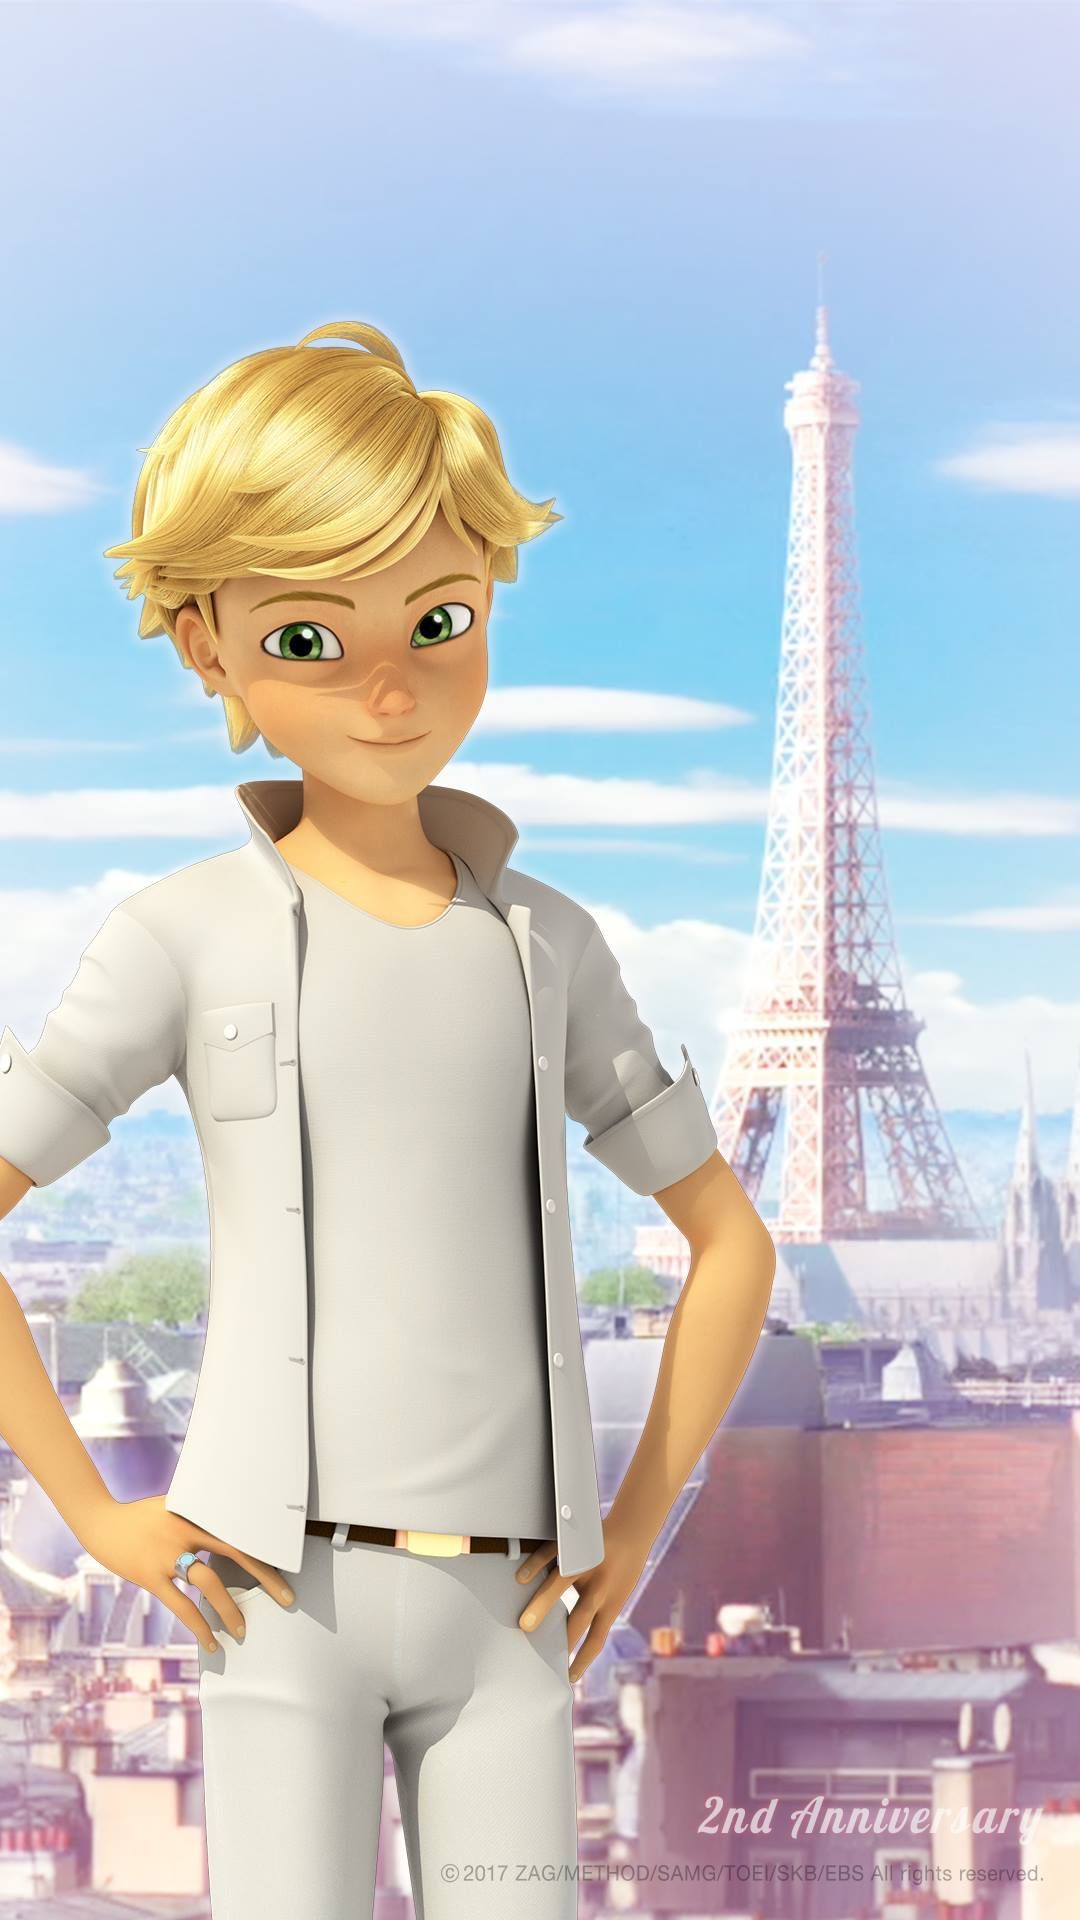 Miraculous Ladybug in all white. Miraculous ladybug anime, Miraculous ladybug, Miraculous ladybug wallpaper